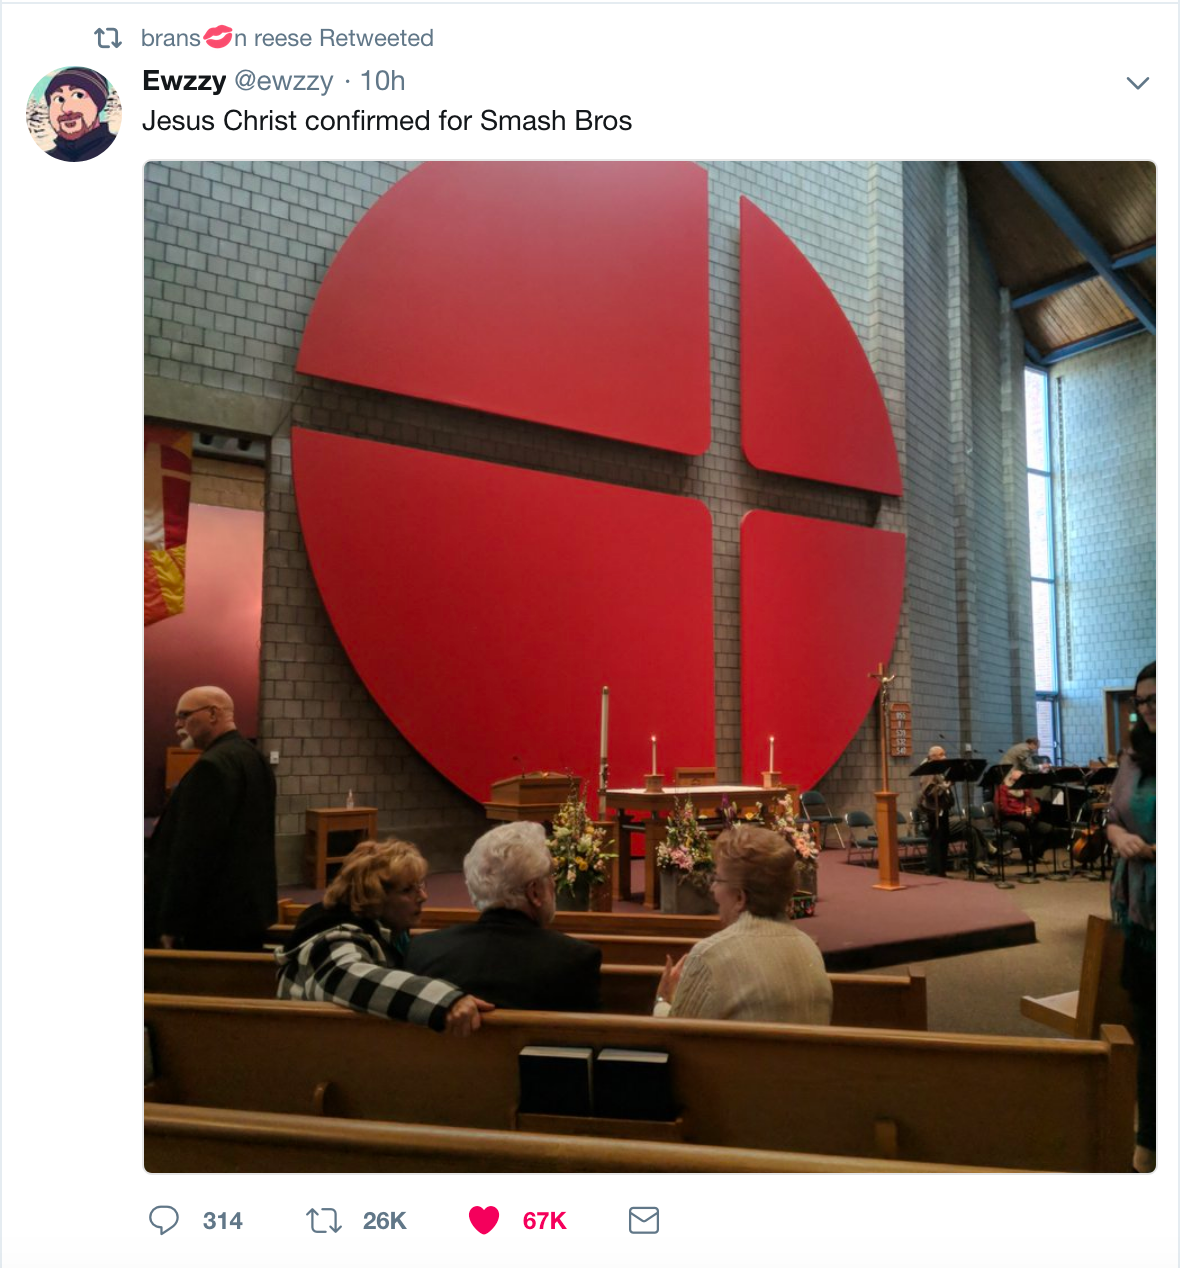 funny meme about jesus confirmed for smash - 1 branson reese Retweeted Ewzzy Cewzzy 10h Jesus Christ confirmed for Smash Bros 314 67%